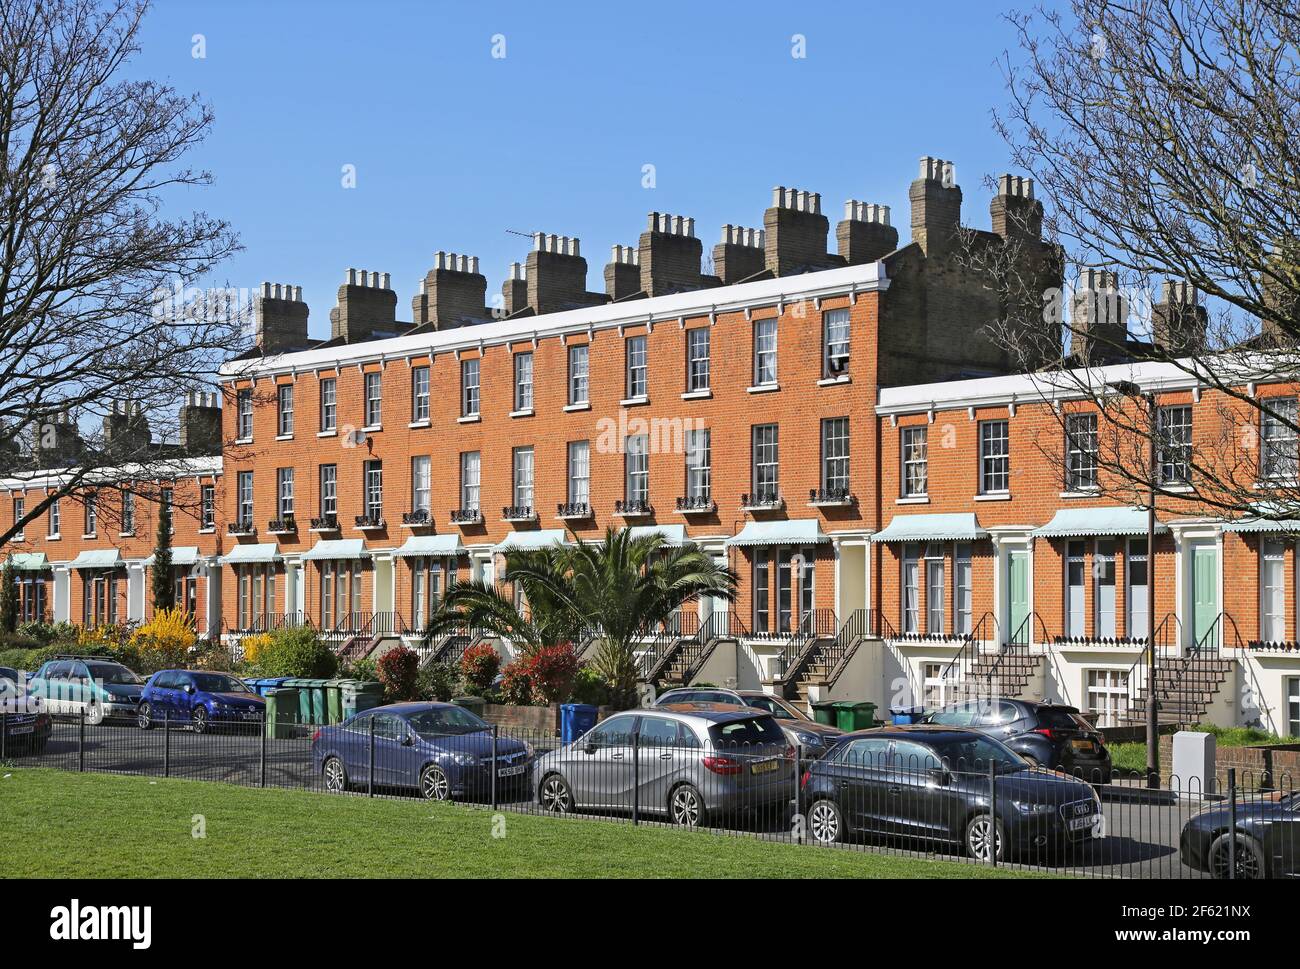 Clifton Crescent, Peckham, London, UK. A famous row of Regency period Victorian terrace houses. Threatened with demolition in the 1970s - now listed. Stock Photo